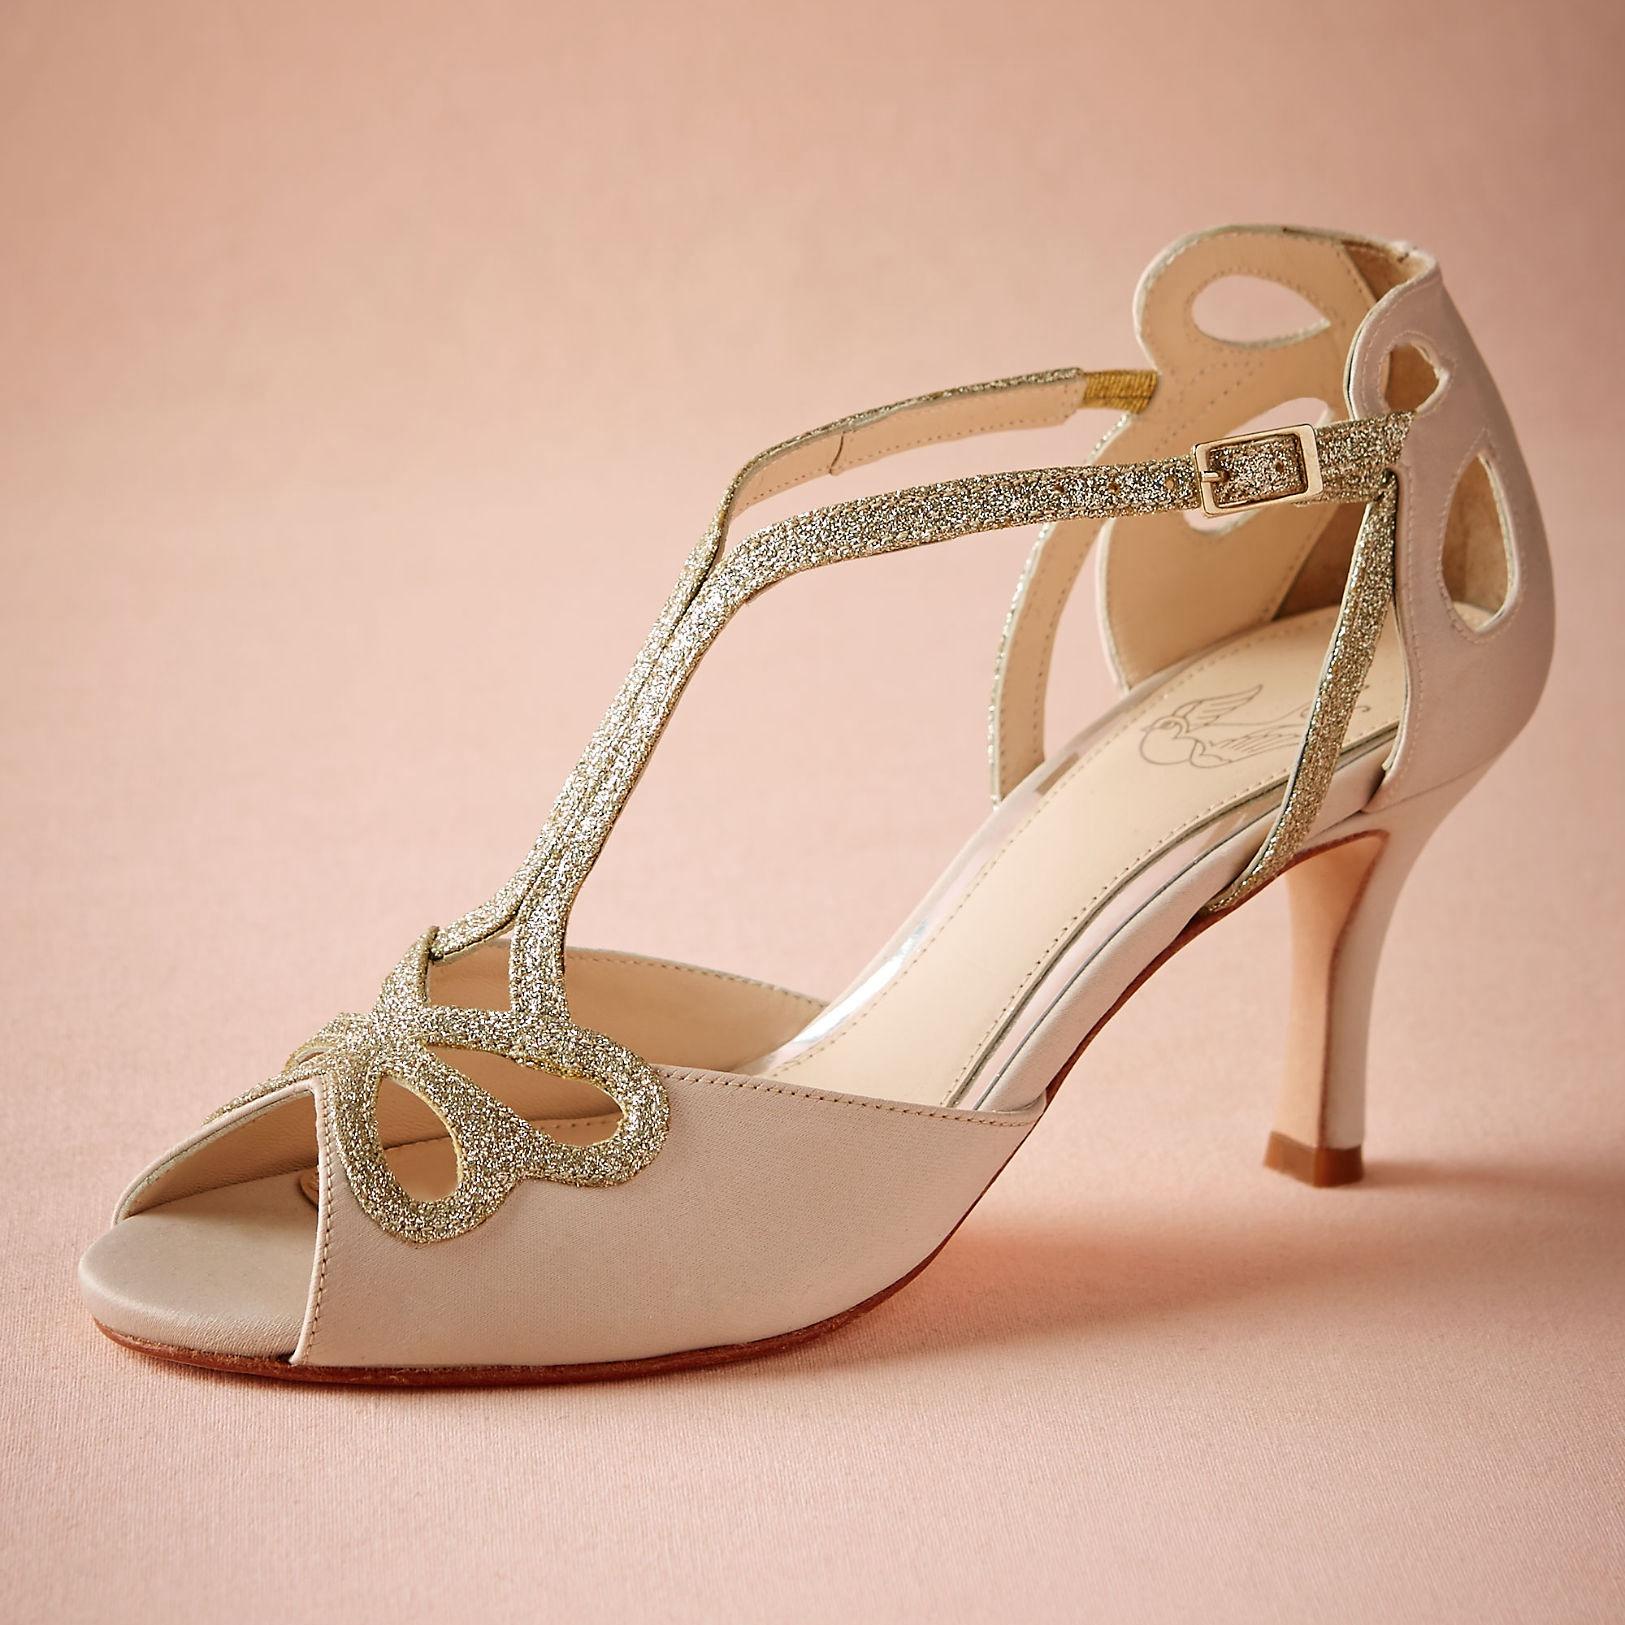 Blush Low Heel Wedding Shoes Hollow Out Peep Toe Bridal Sandals For ...